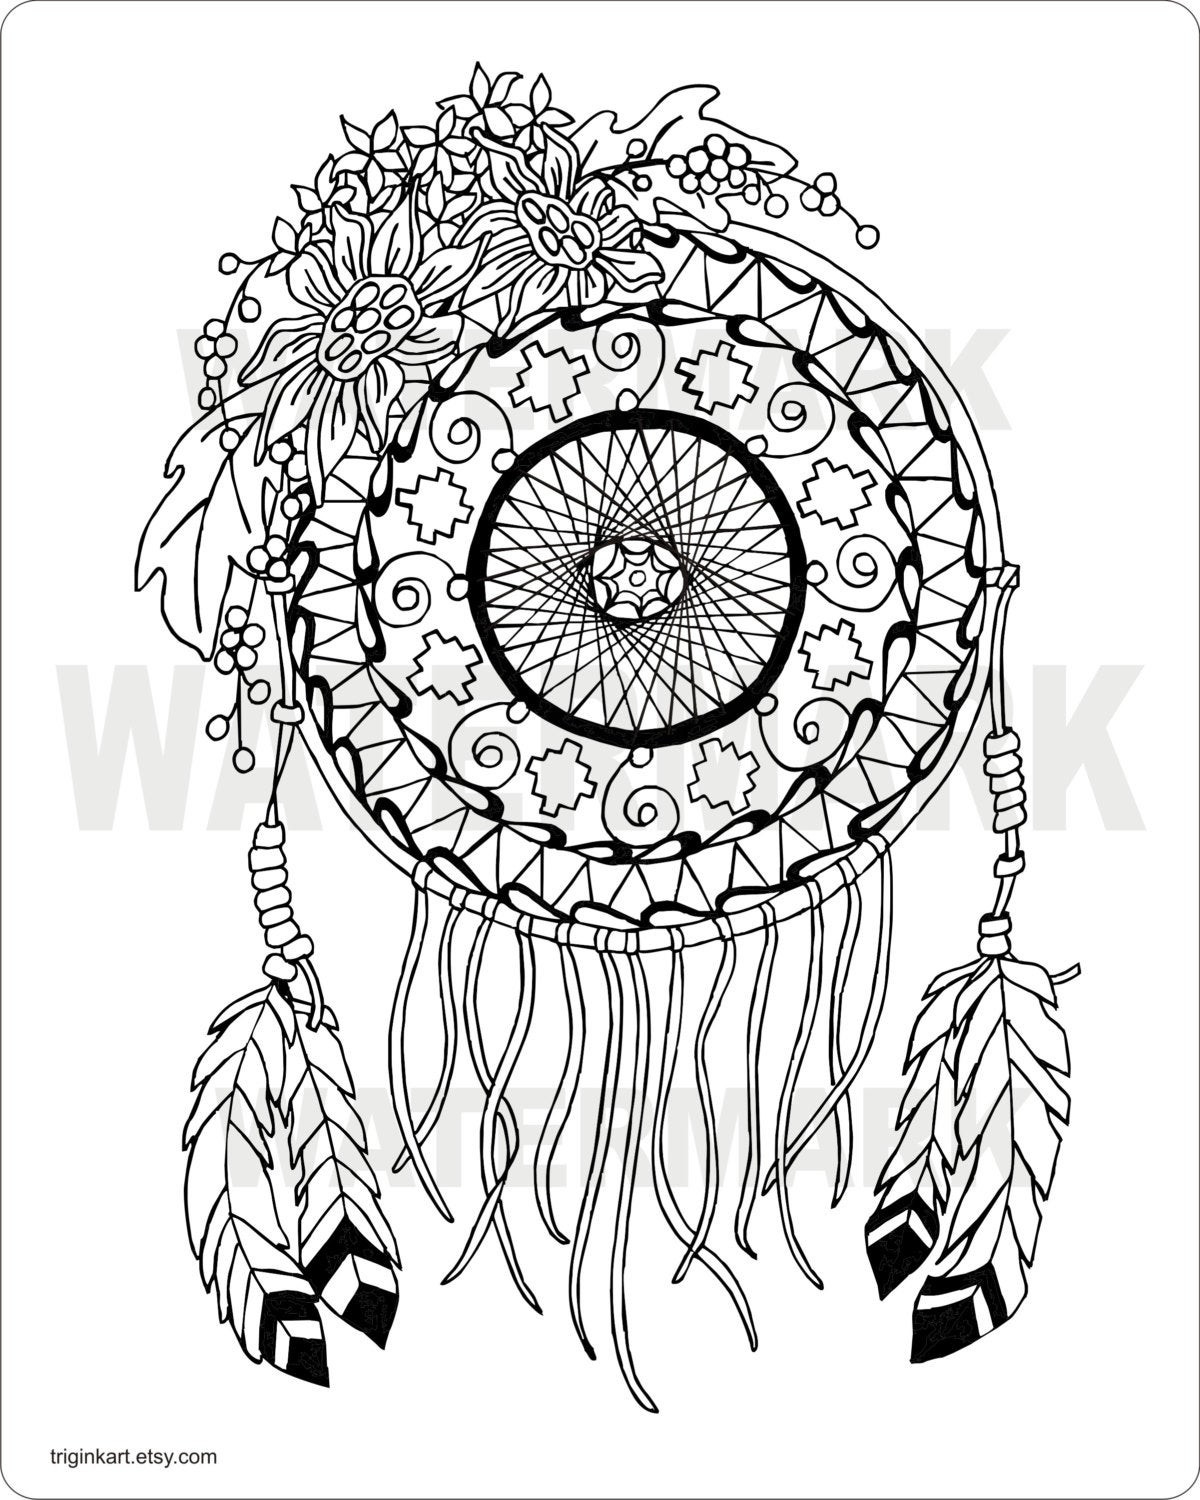 Printable Adult Coloring Pages Dream Catchers
 Sunflower Dream Catcher Adult coloring page